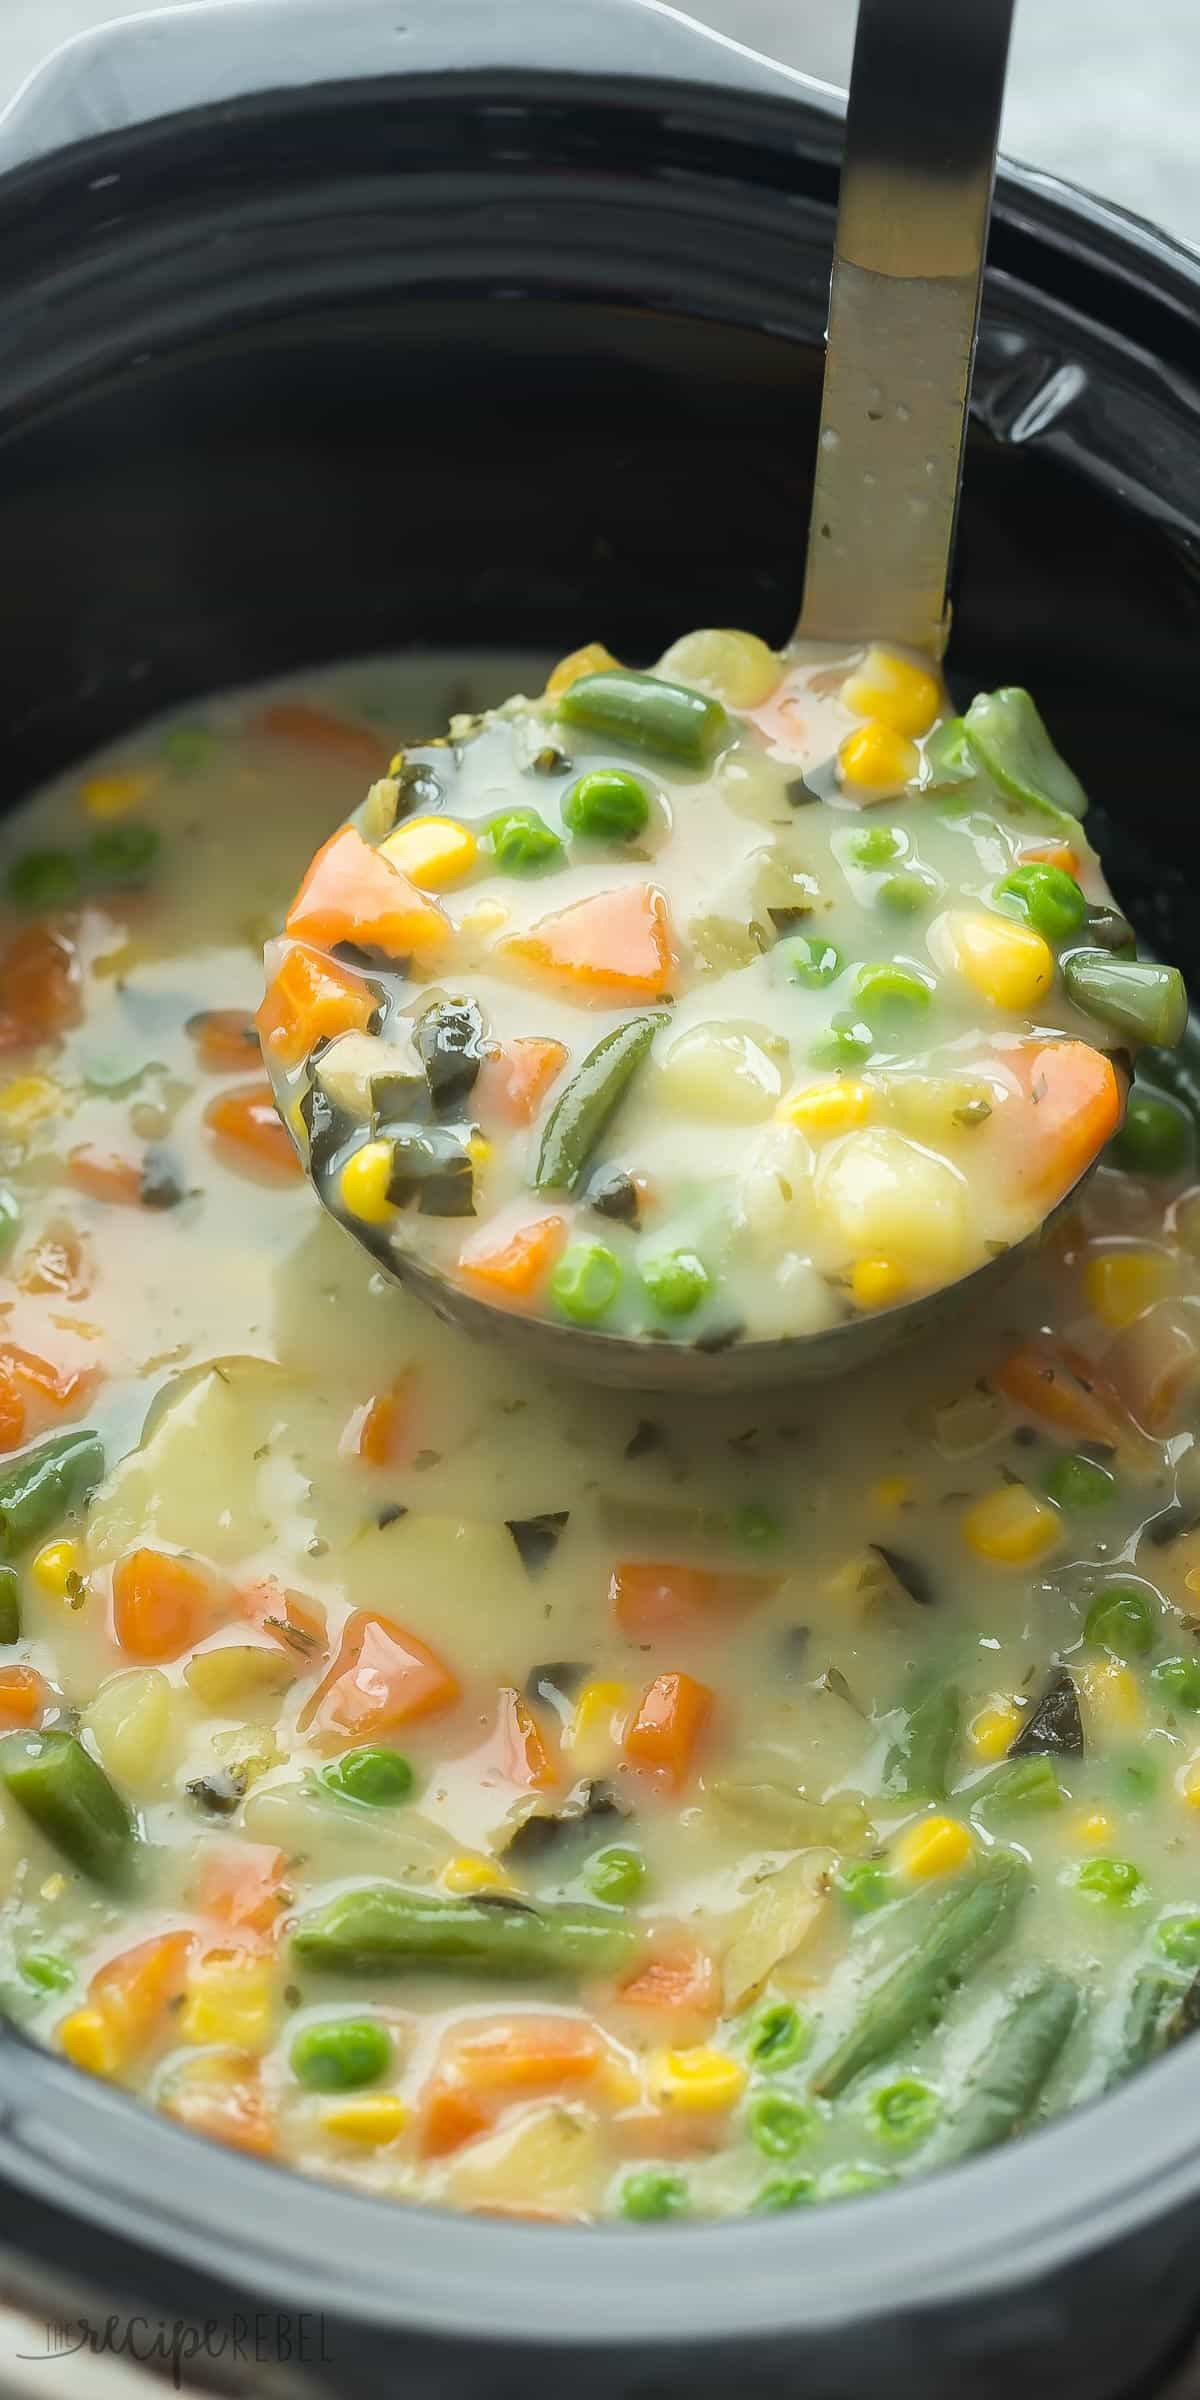 Healthy Vegetarian Crockpot Recipes
 Slow Cooker Creamy Ve able Soup with RECIPE VIDEO